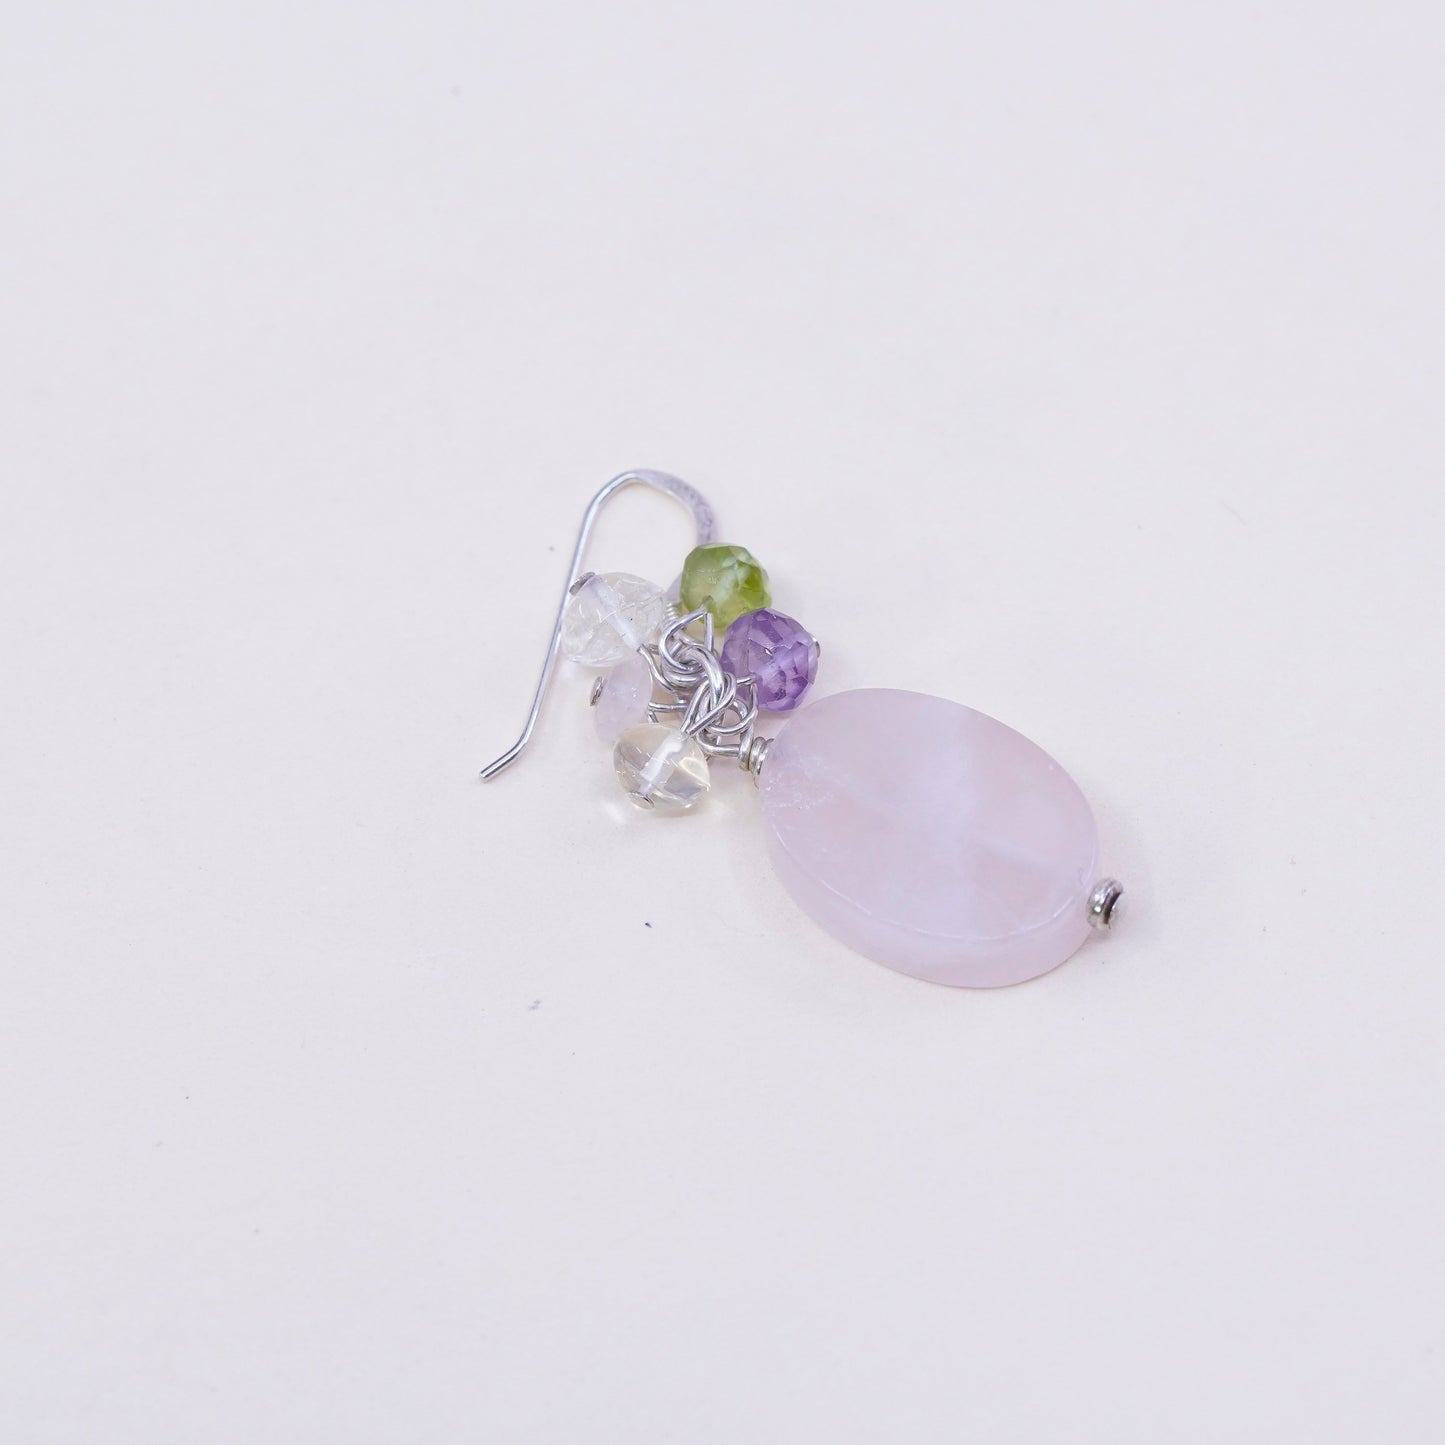 Sterling 925 silver earrings with cluster amethyst Crystal and rose pink quartz